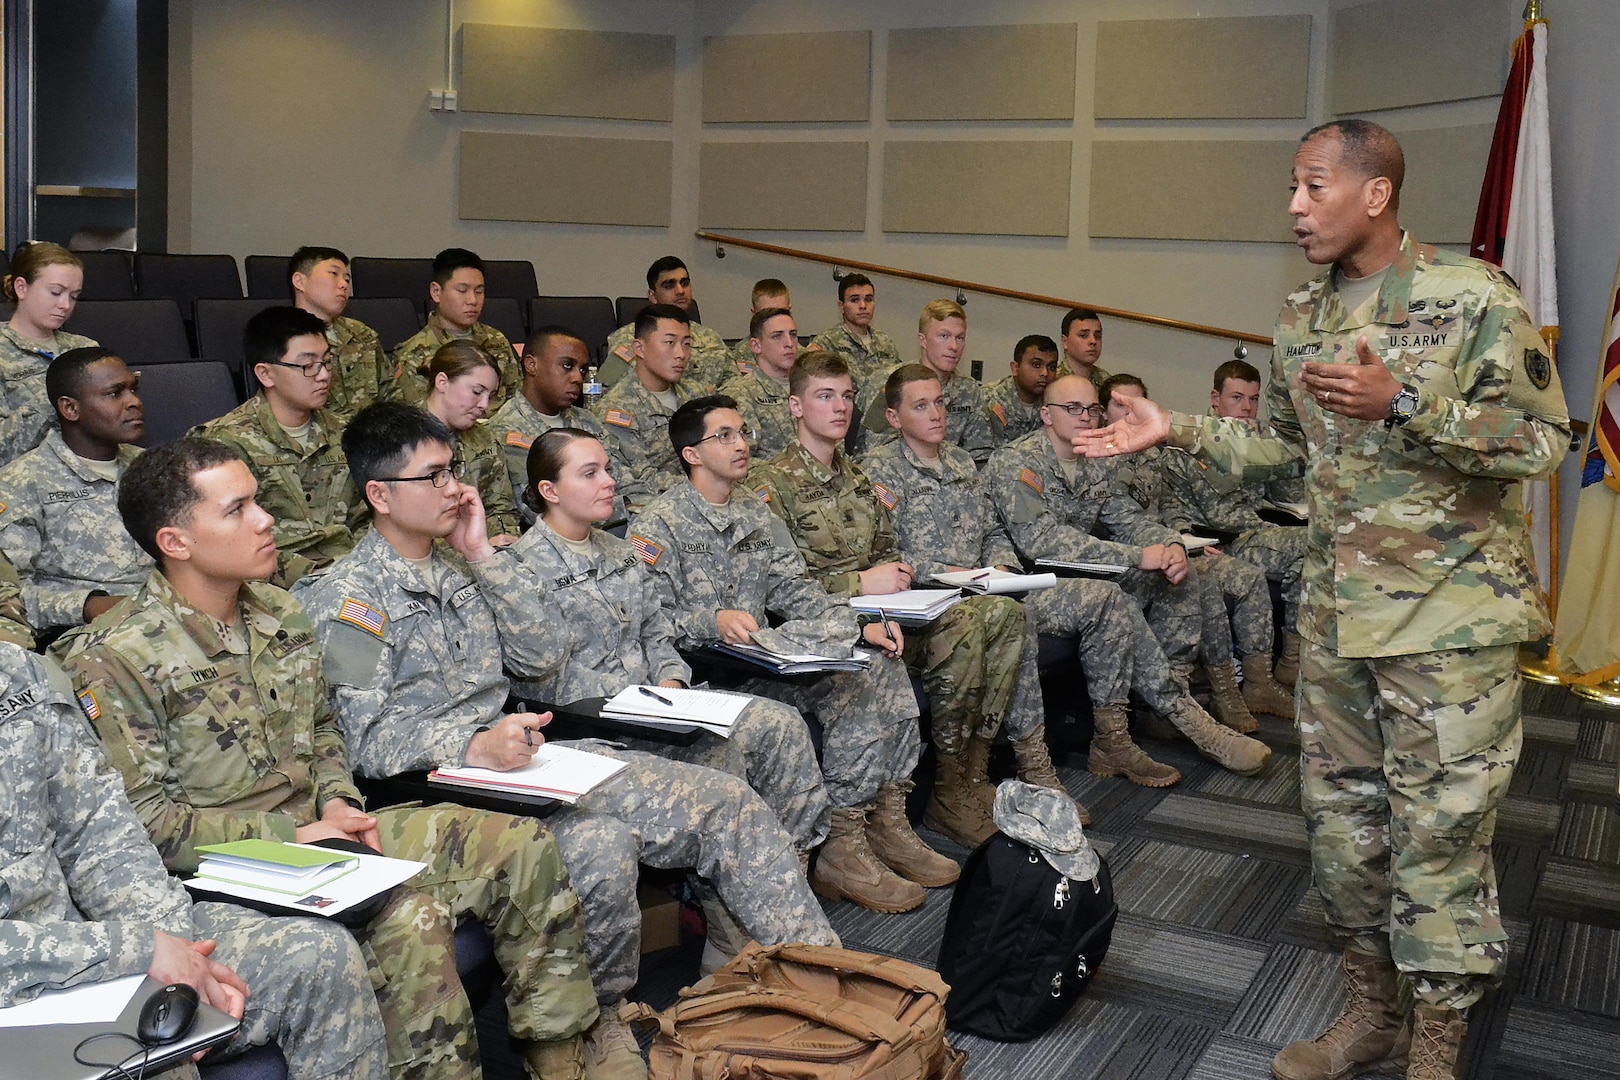 Army Brig. Gen. Charles Hamilton, Defense Logistics Agency Troop Support commander, speaks to ROTC cadets at Rutgers University, New Brunswick, N.J., Feb. 23. He advised the cadets that to be successful, officers must ensure their units are highly fit, highly trained and highly disciplined.